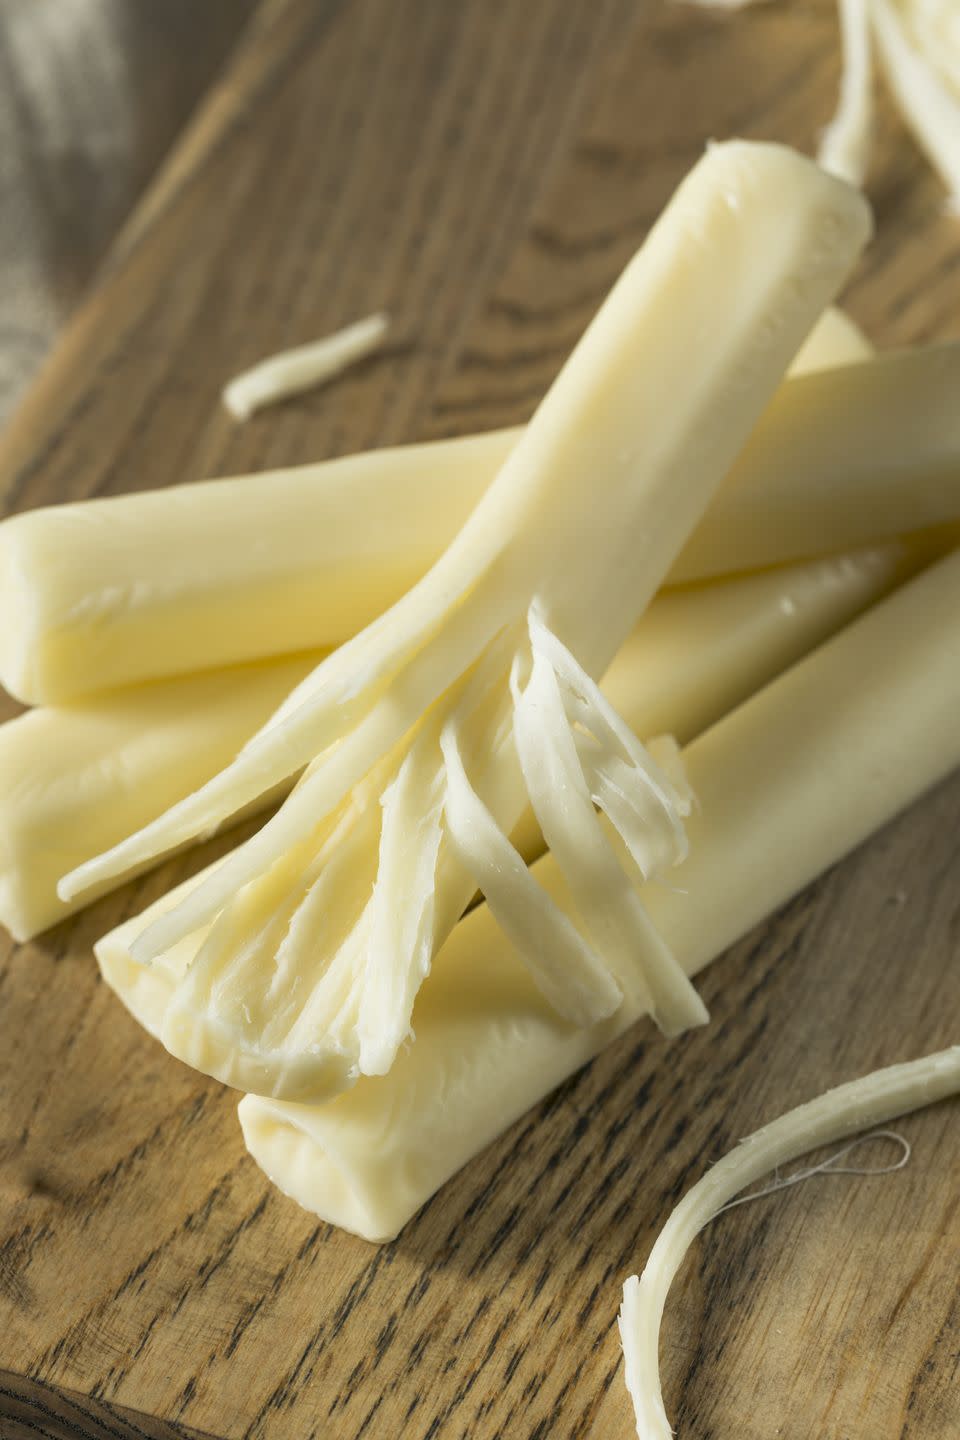 9) String cheese